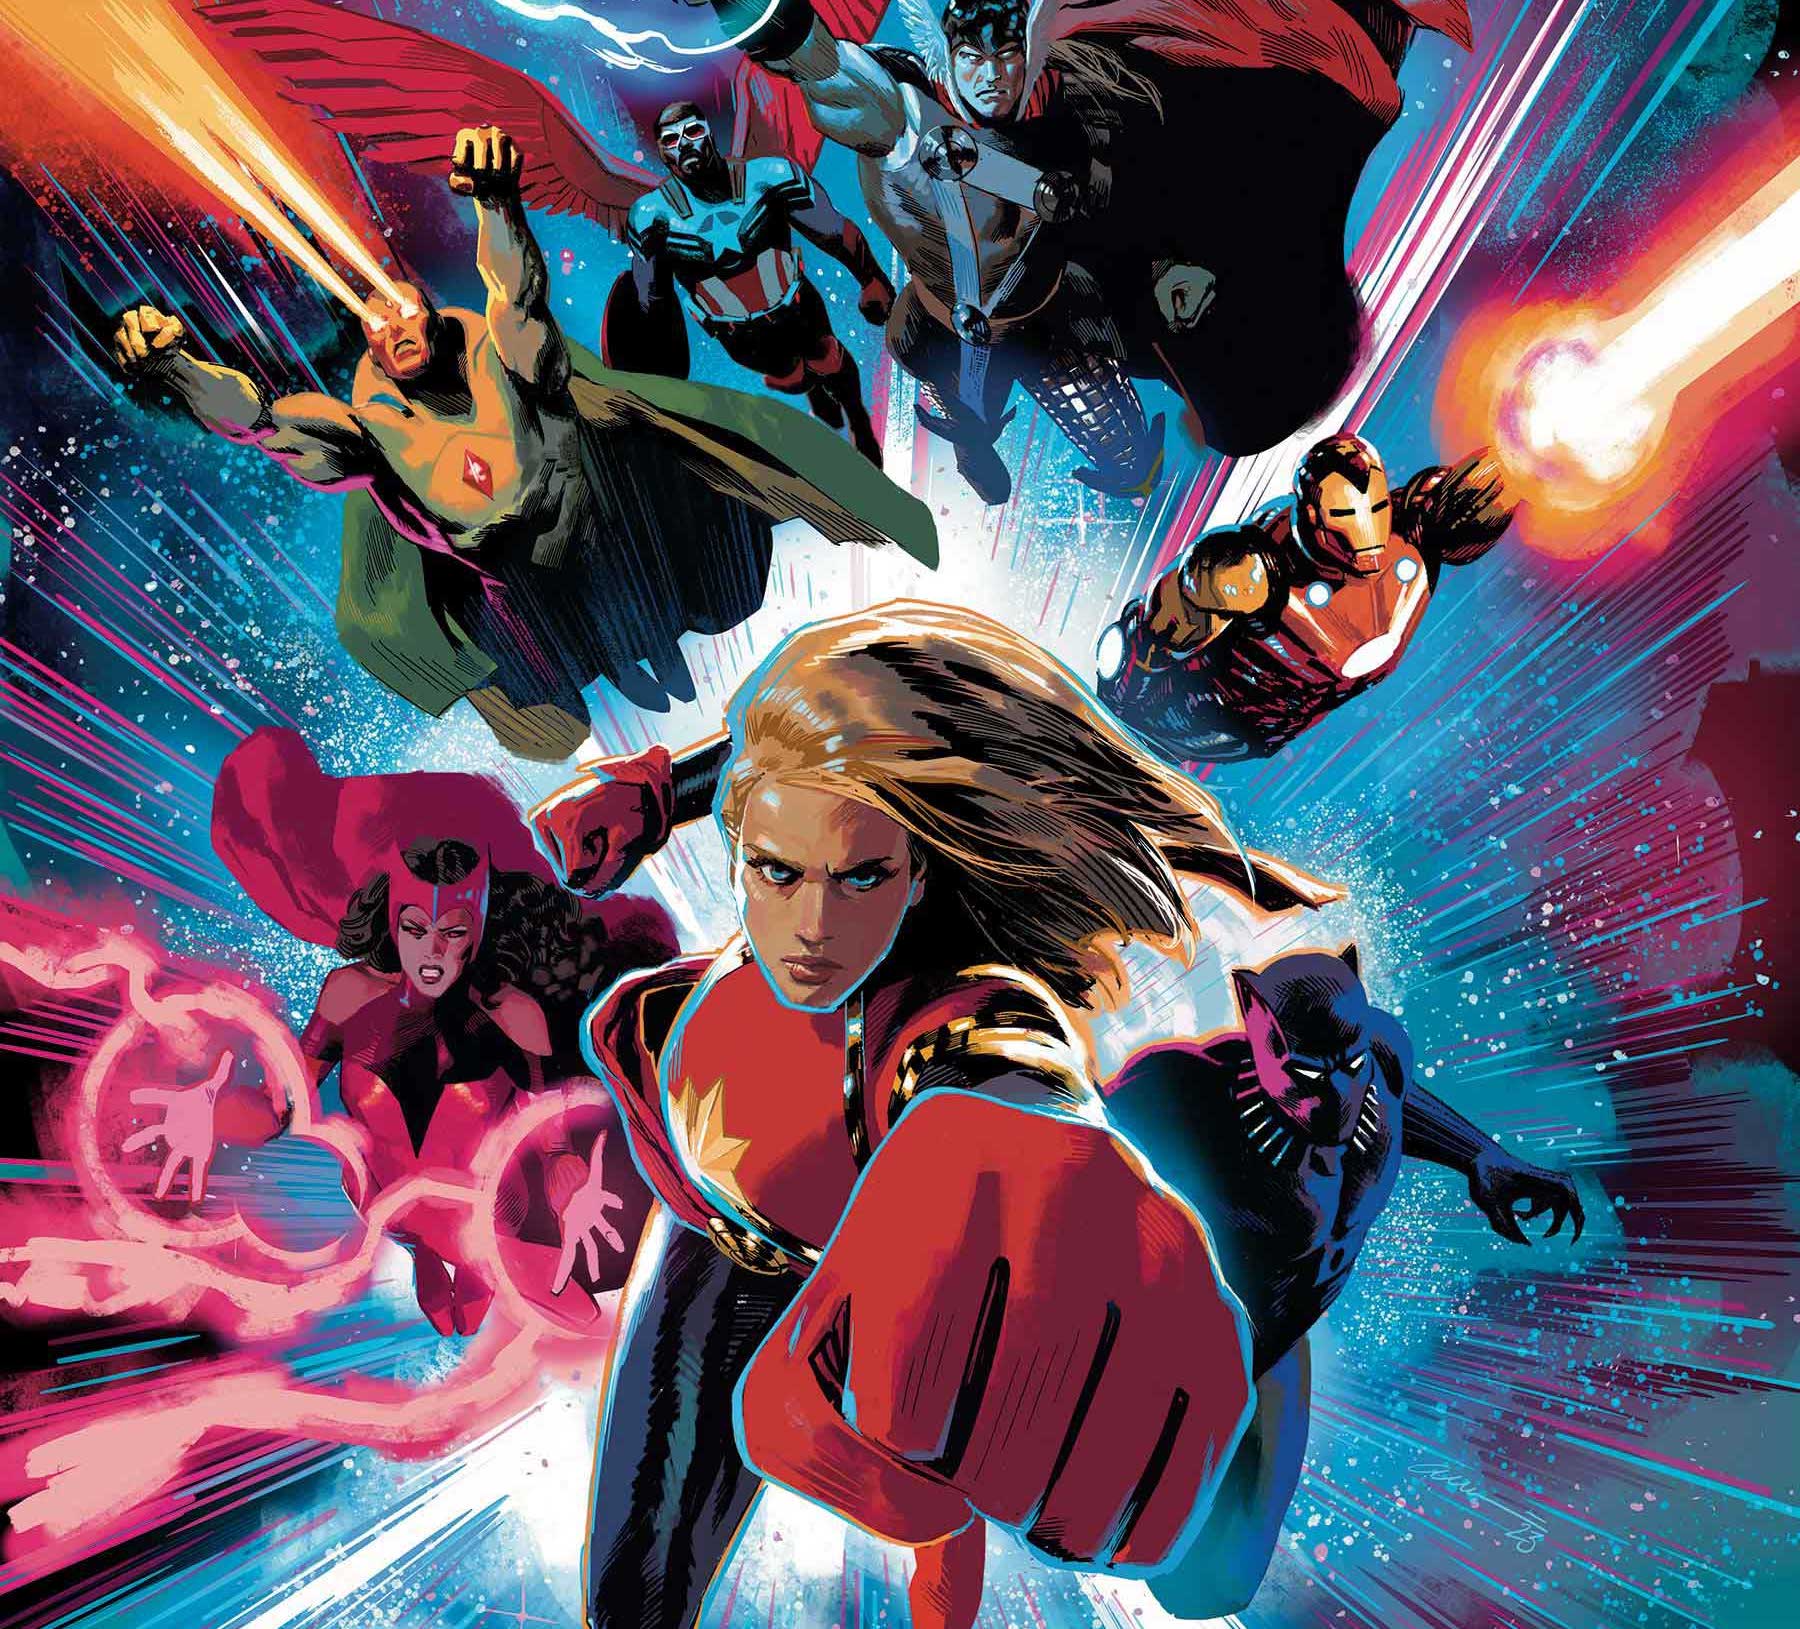 'Avengers' #1 gets cosmic with Daniel Acuña variant cover